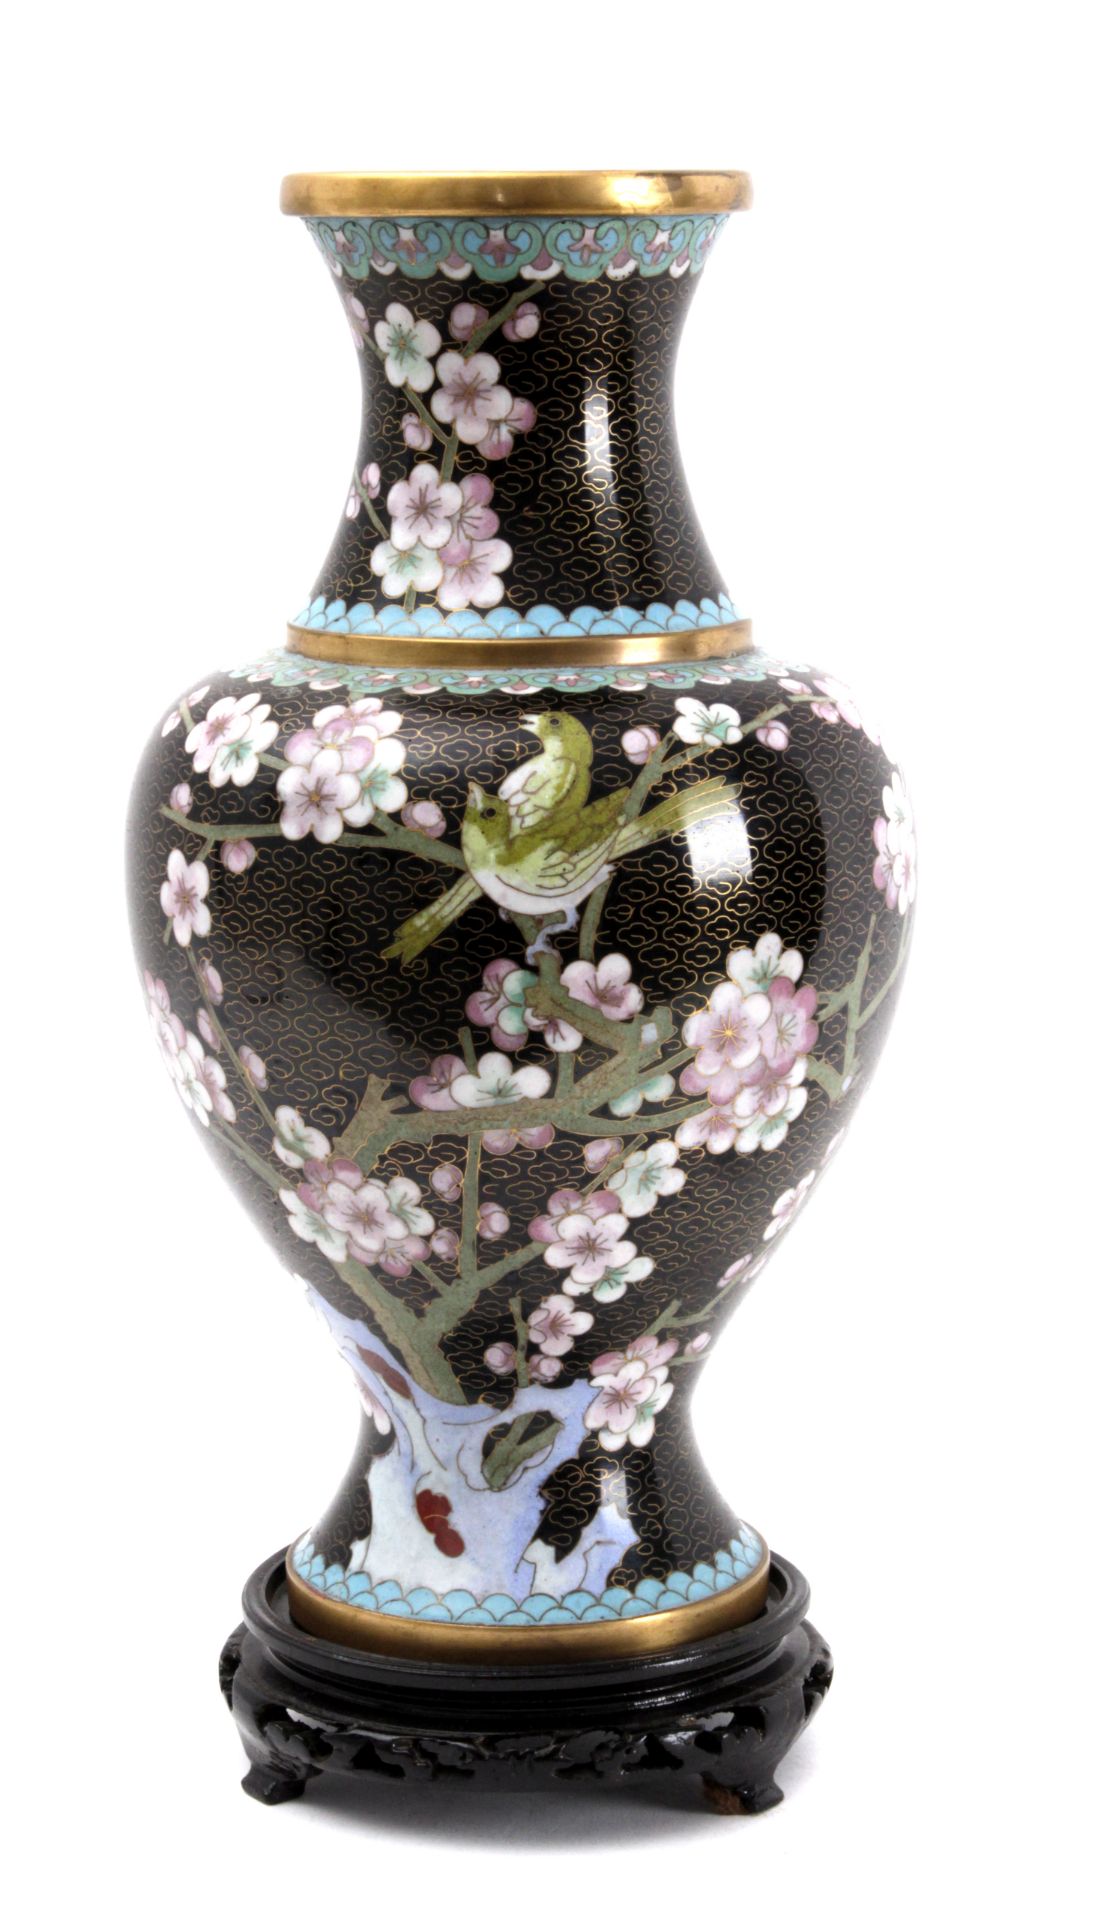 A 20th century Chinese vase in bronze and cloisonné enamel